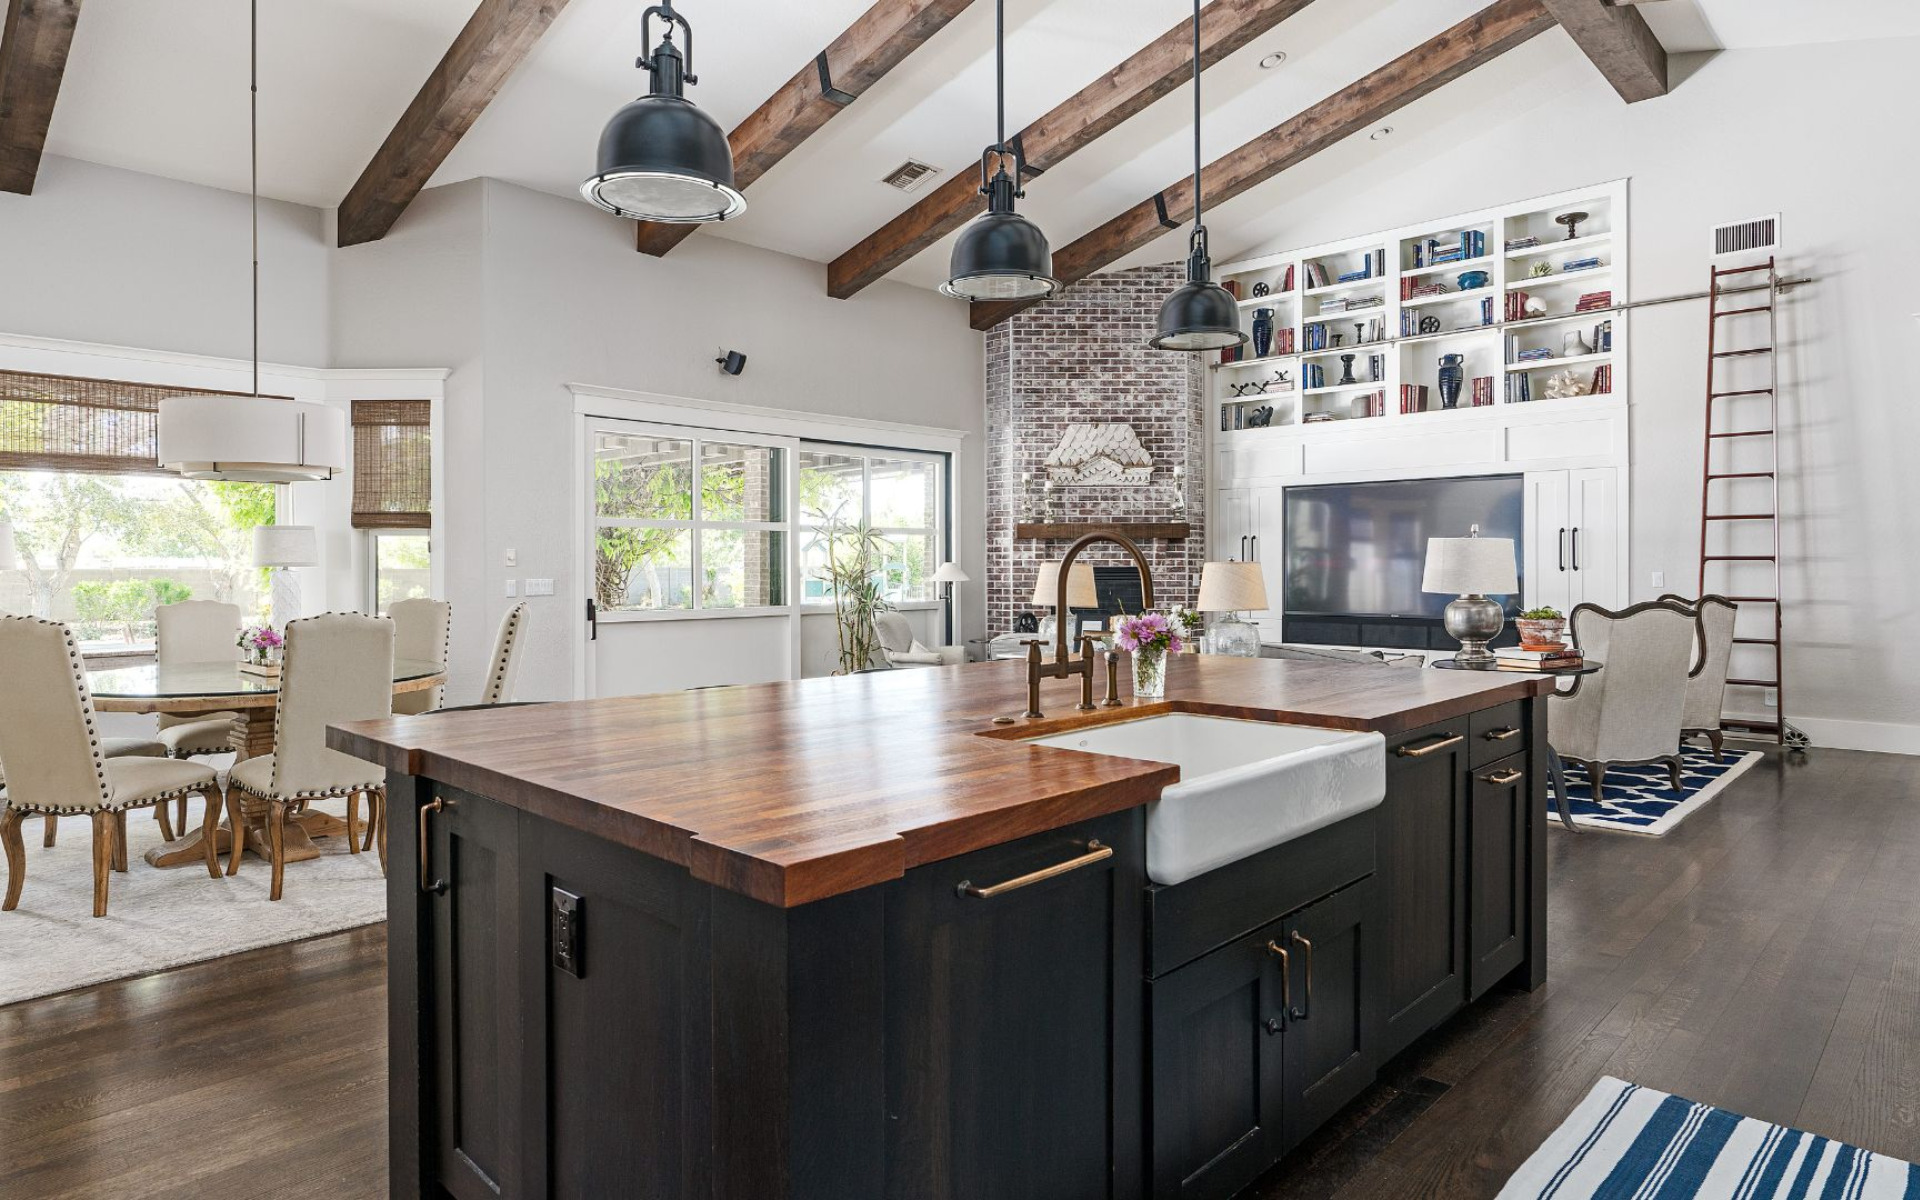 Farmhouse style kitchen with black cabinets and wood countertop